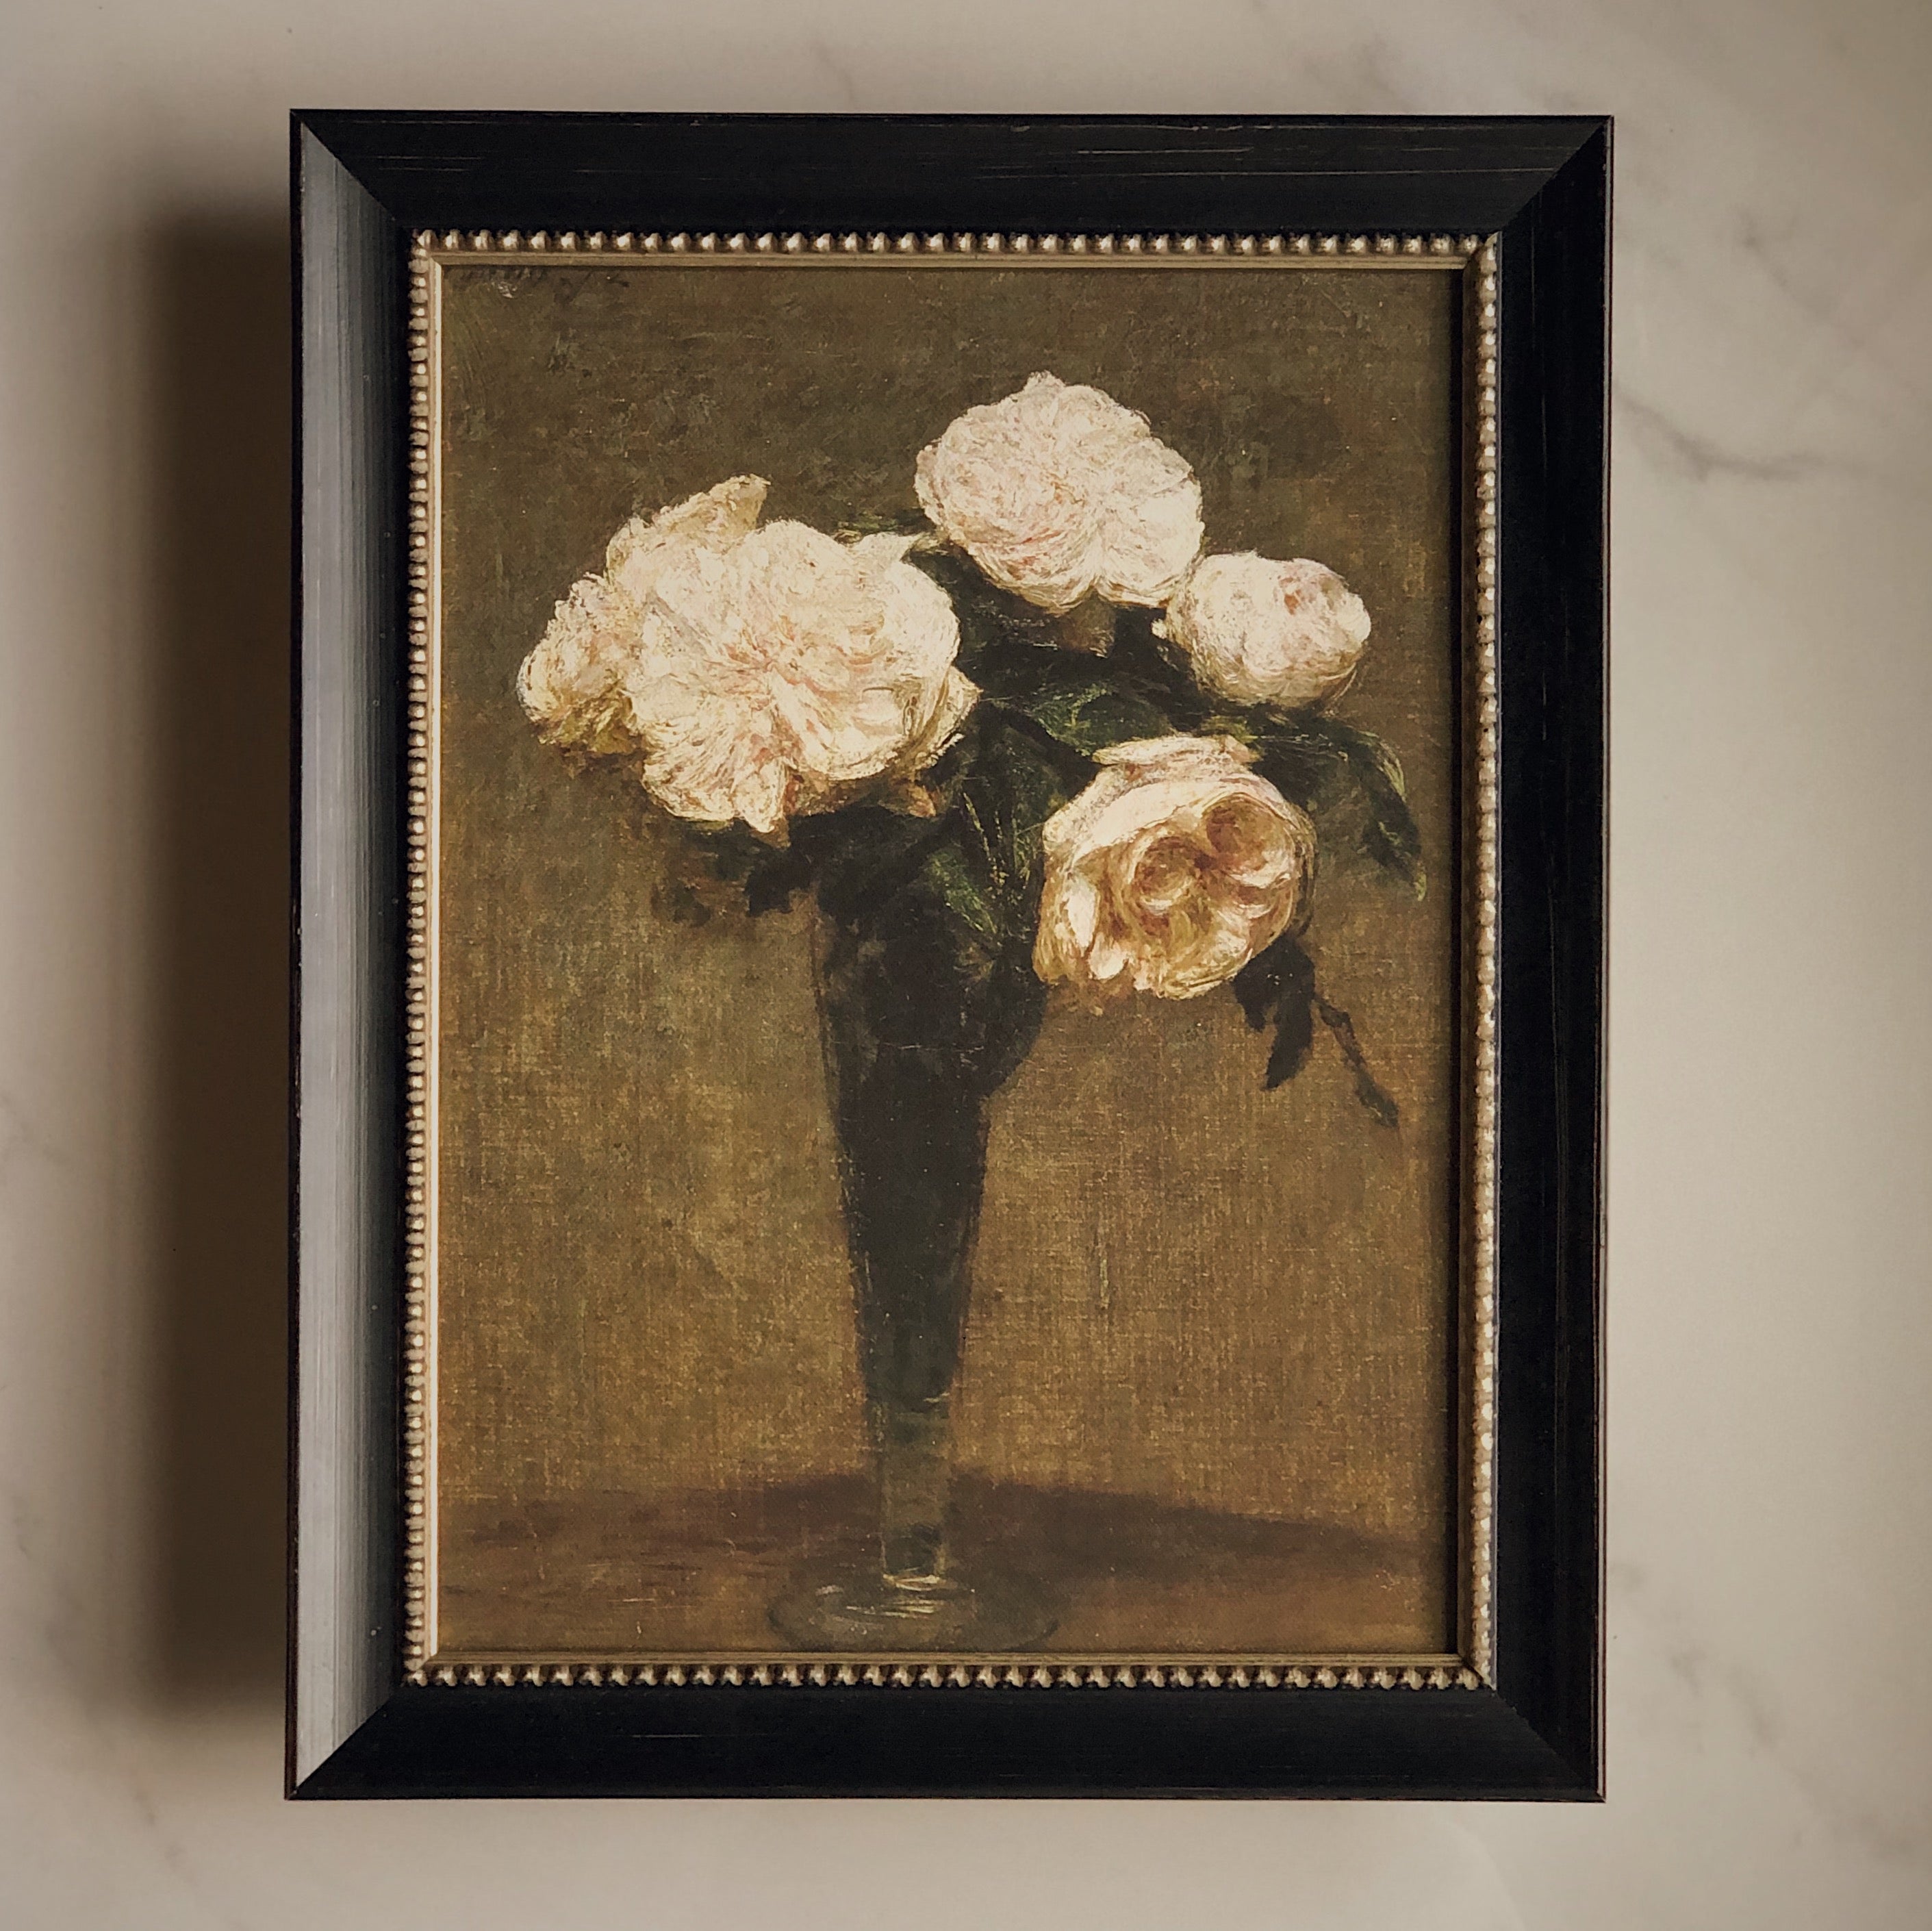 STRETCHED FLAT RIGID CANVAS - Bouquet of white flowers